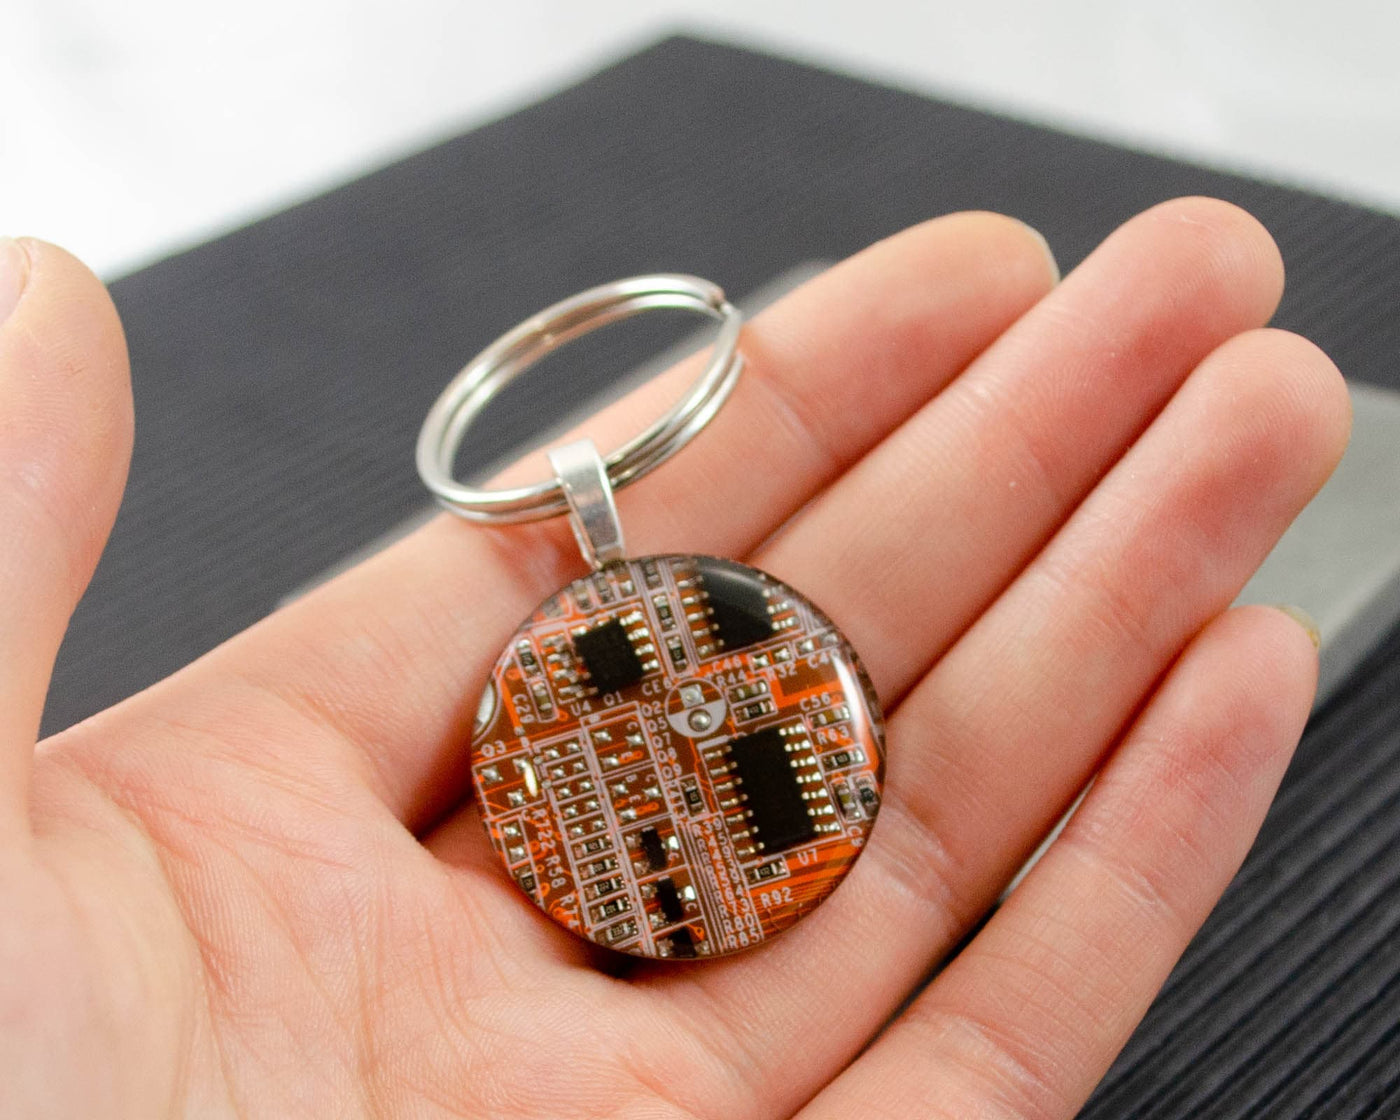 Circuit Board Keychain Orange, Information Technology Gift, Industrial Chic, Electrical Engineer Housewarming Gift